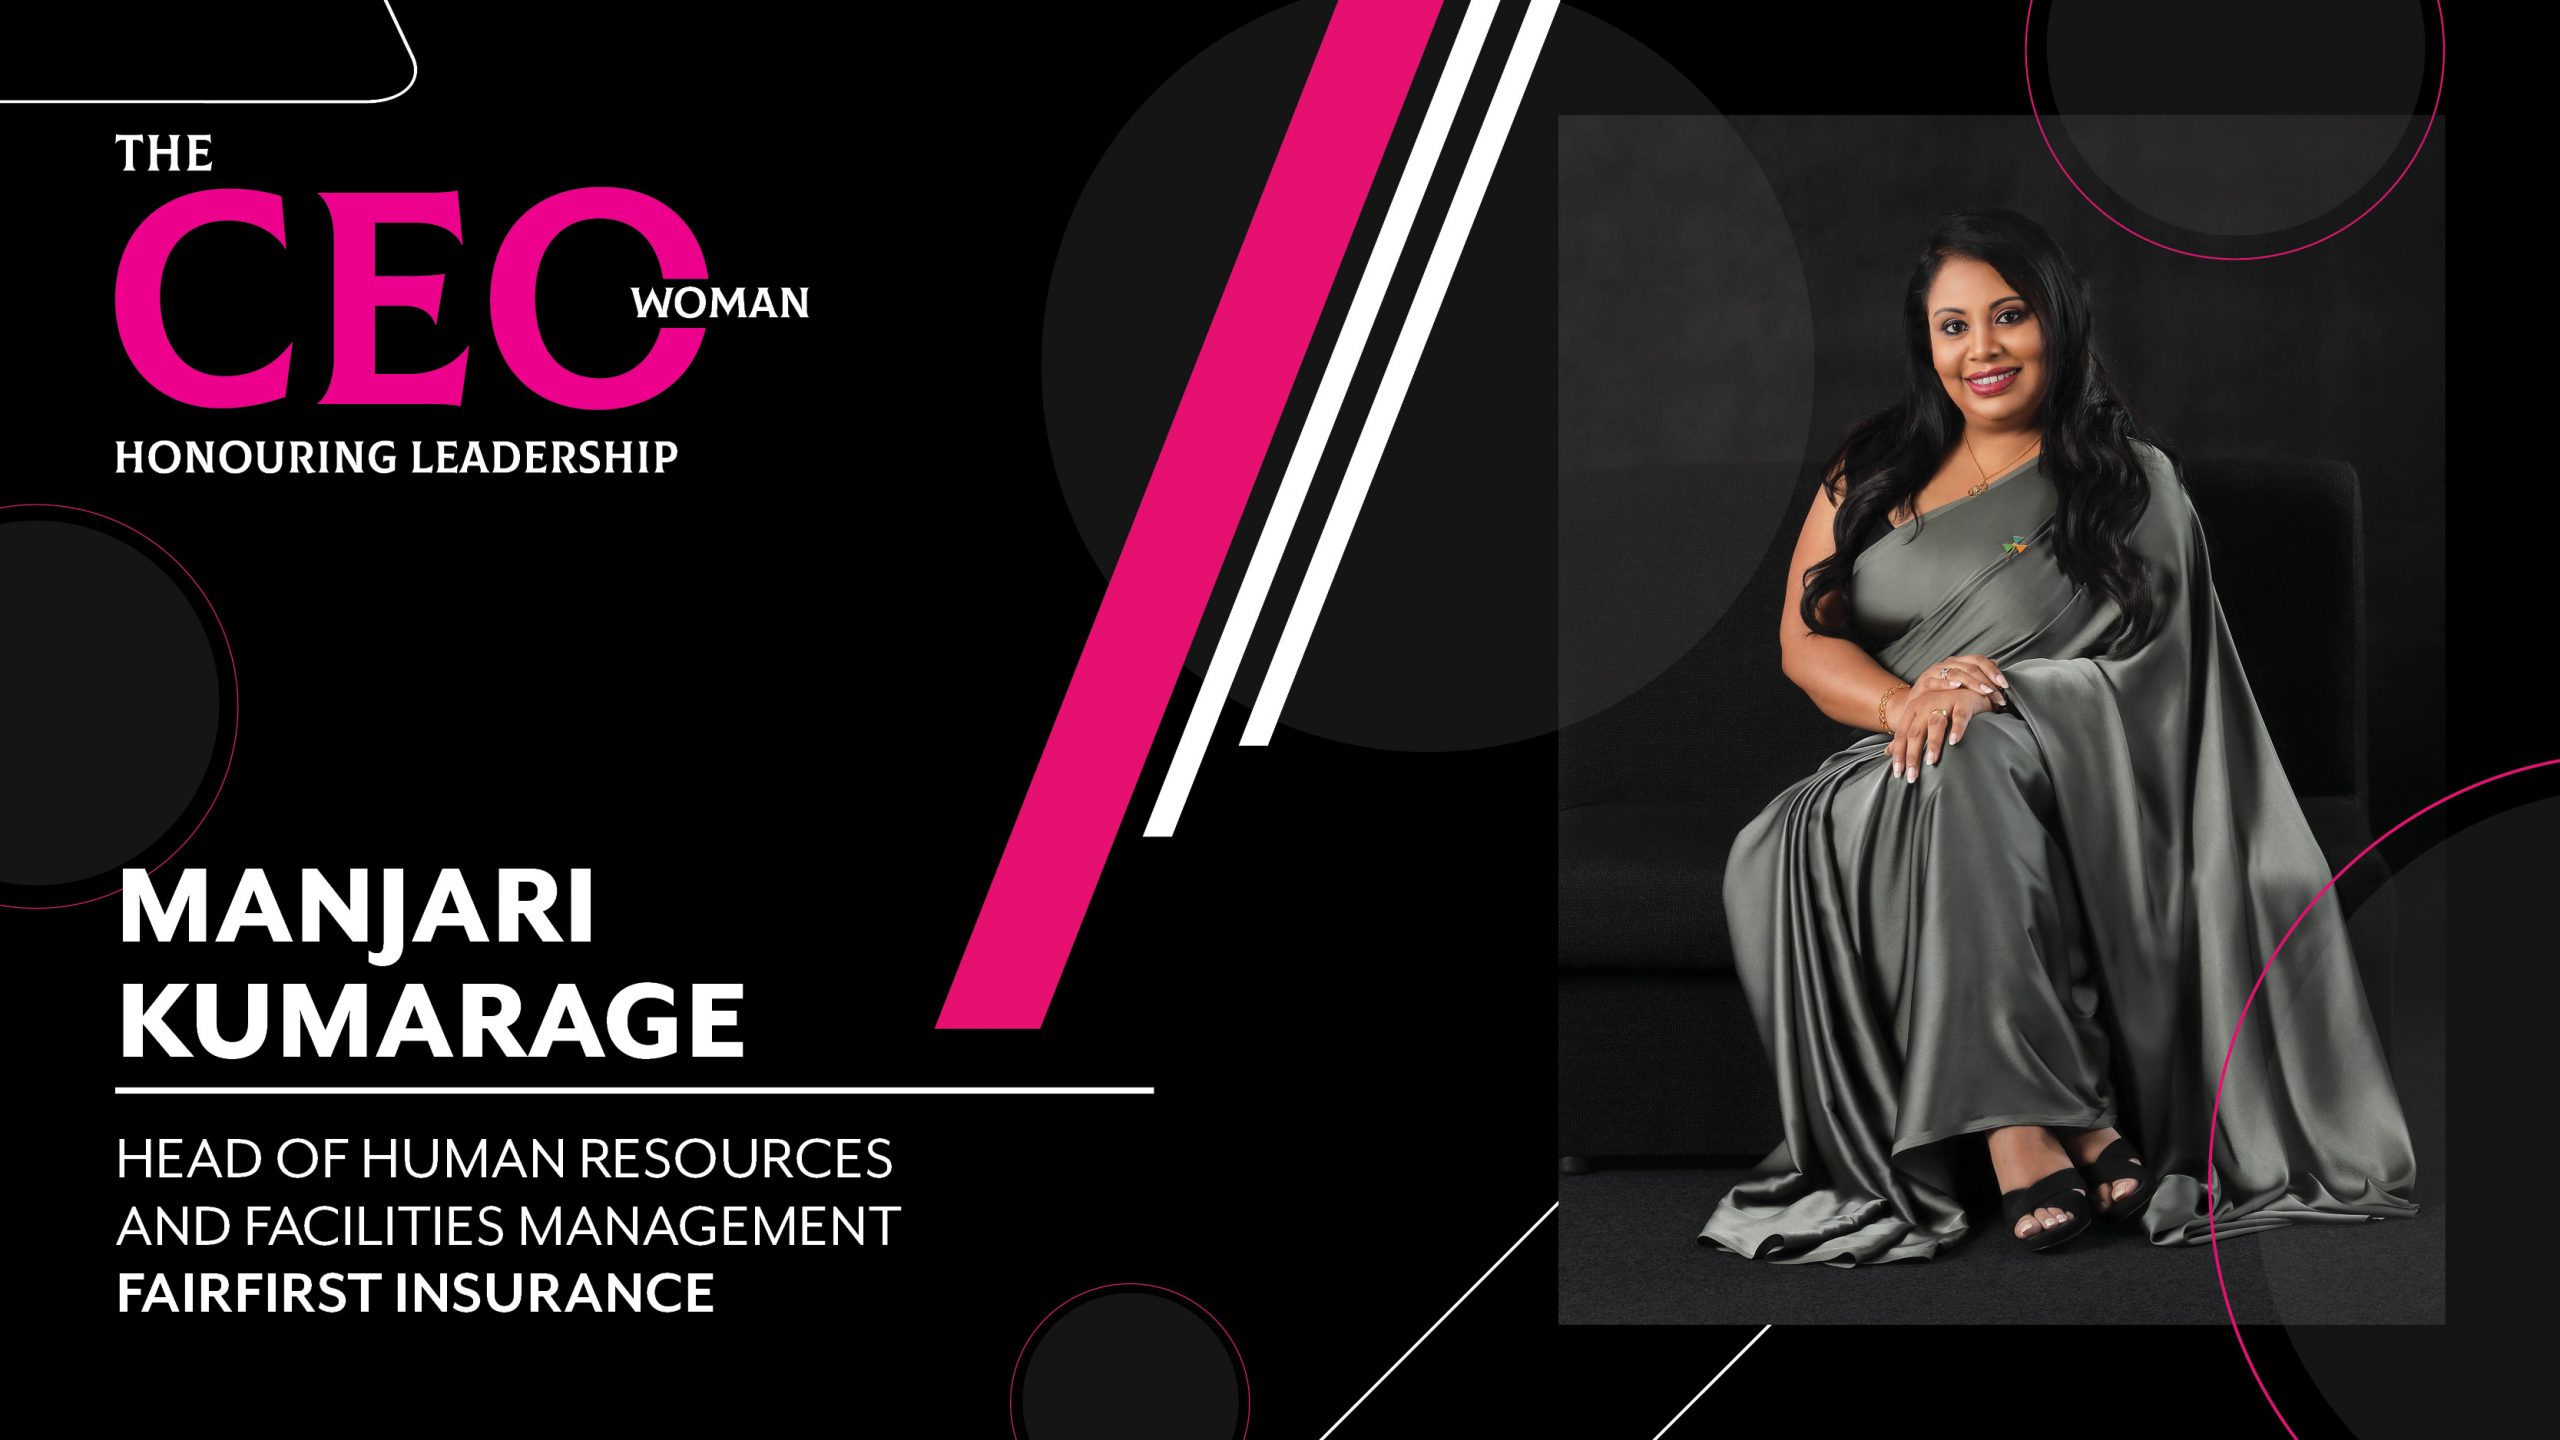 Dynamic Leadership in its Sincere Element – the Head of Human Resources and Facilities Management at Fairfirst Insurance, Manjari Kumarage